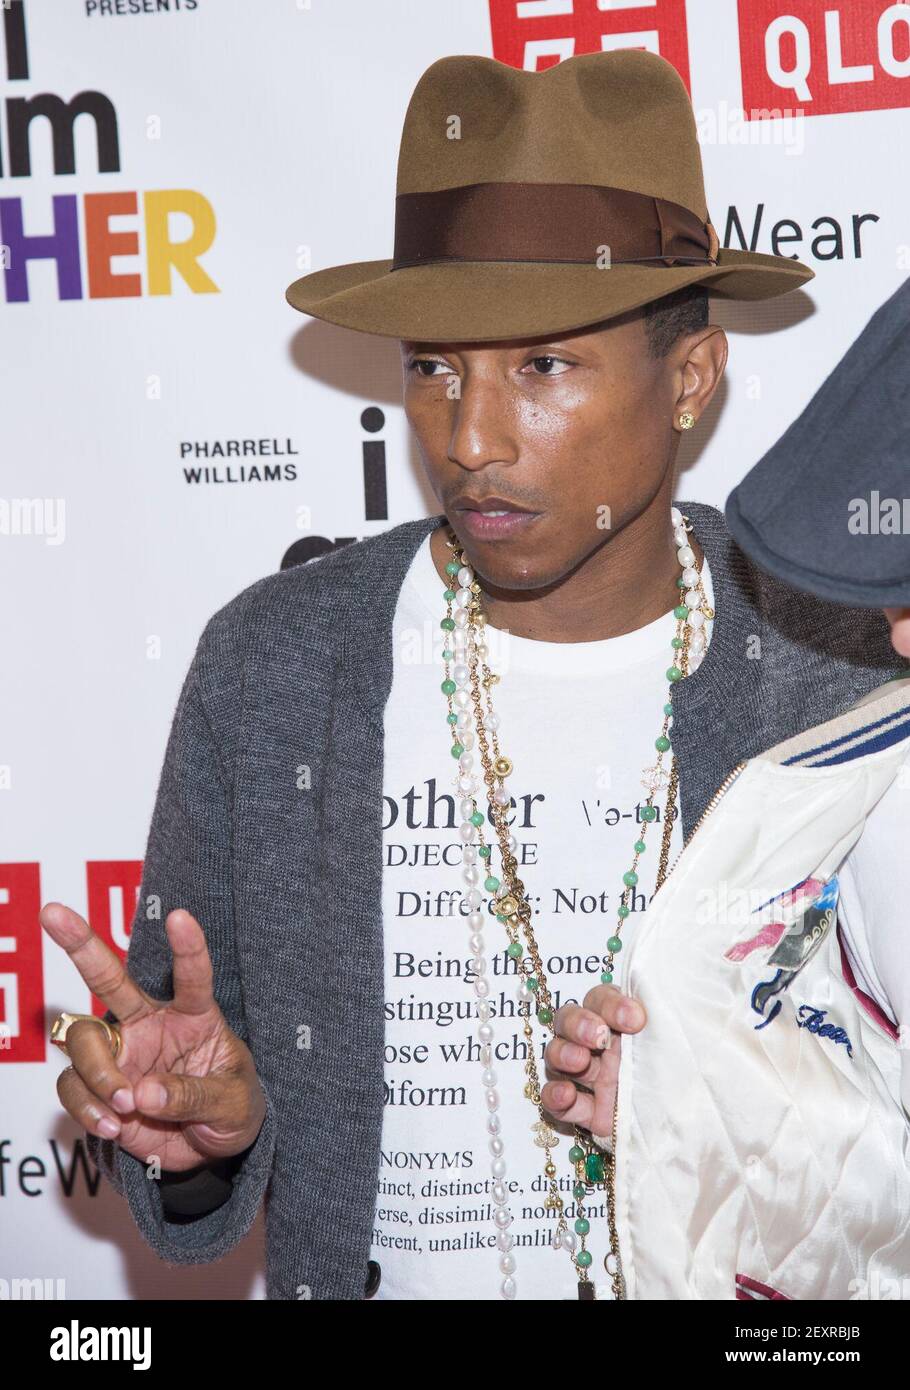 Pharrell Williams attends the Pharrell Williams UNIQLO "I Am Other"  Collection Launch in New York City at the UNIQLO 5th Avenue Flagship Store  on April 28, 2014. (Photo by Marco Sagliocco/Sipa USA